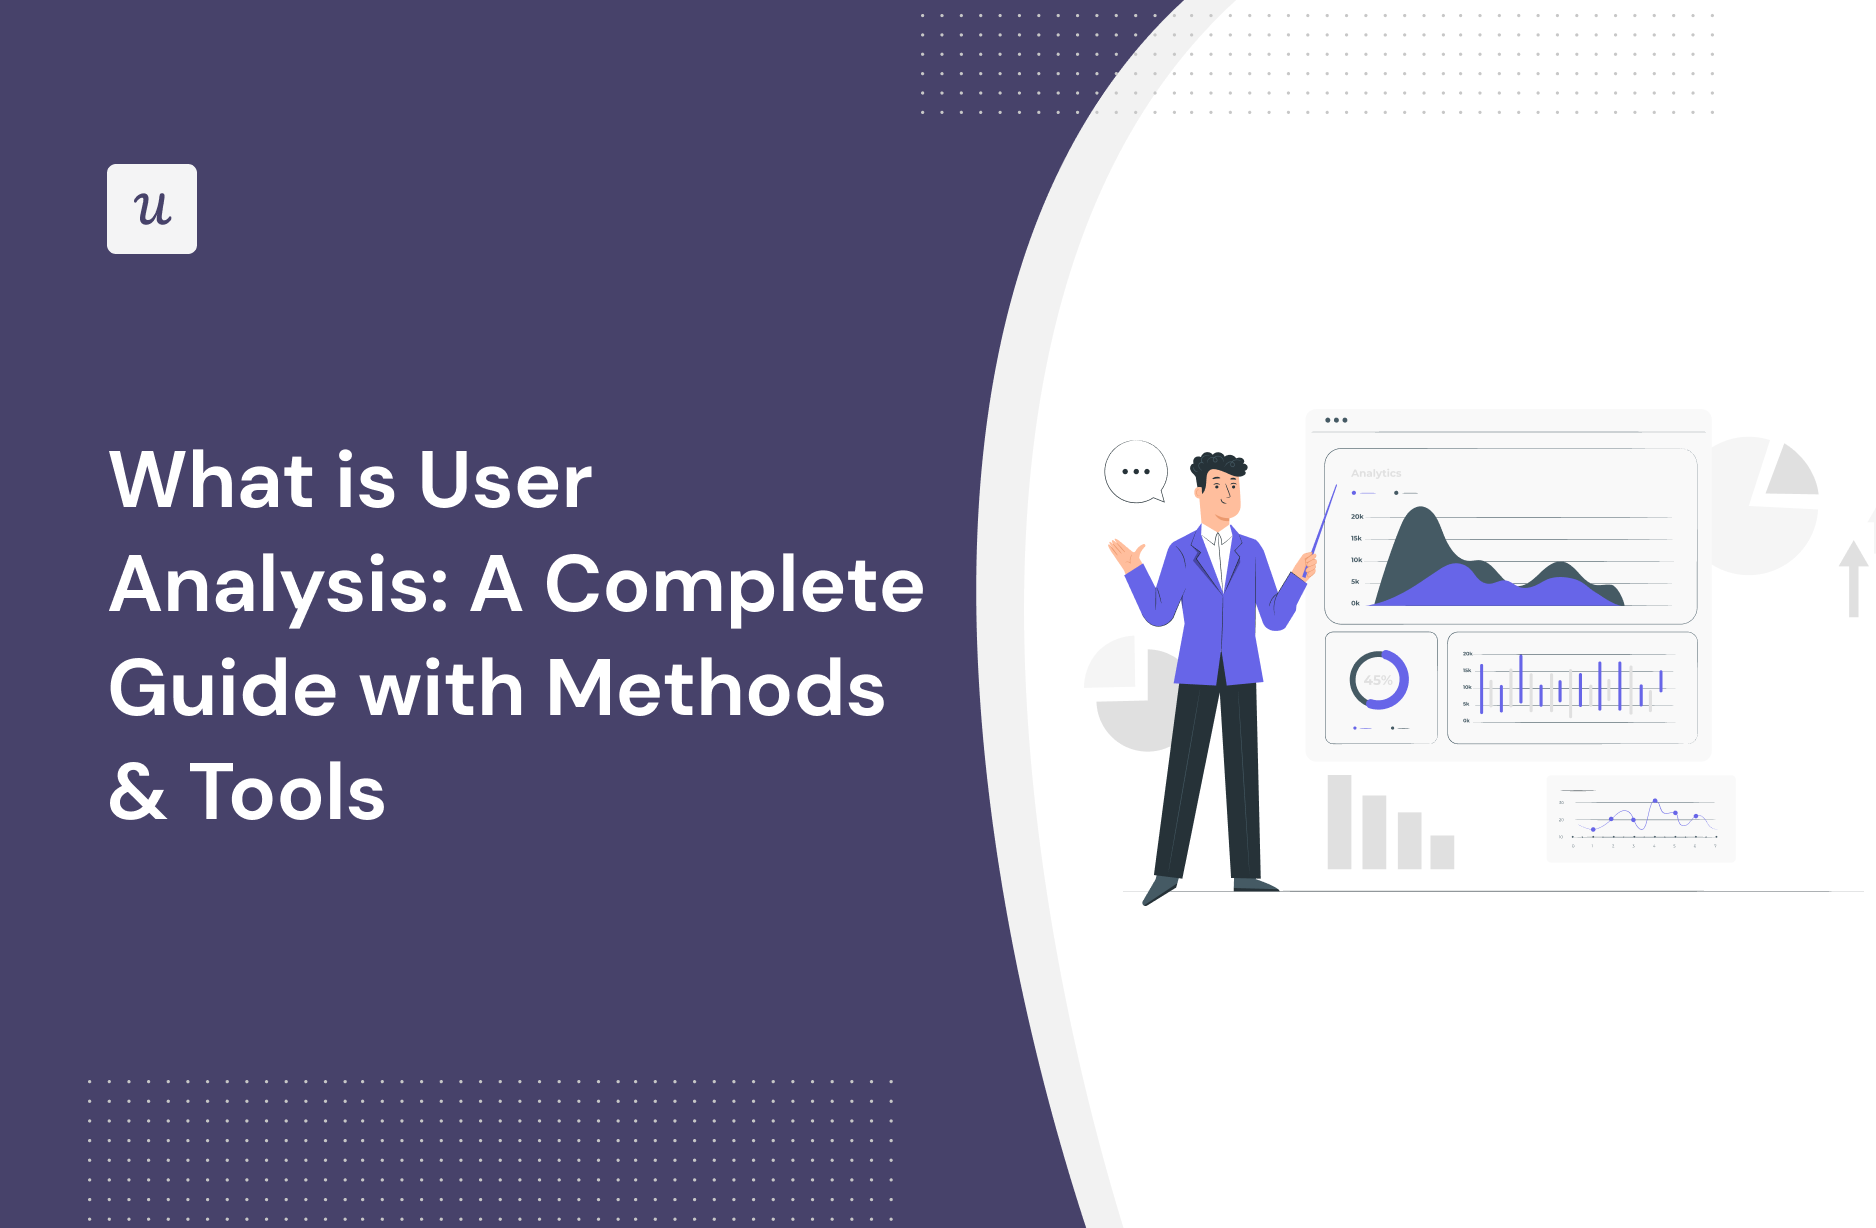 What is User Analysis: A Complete Guide with Methods & Tools